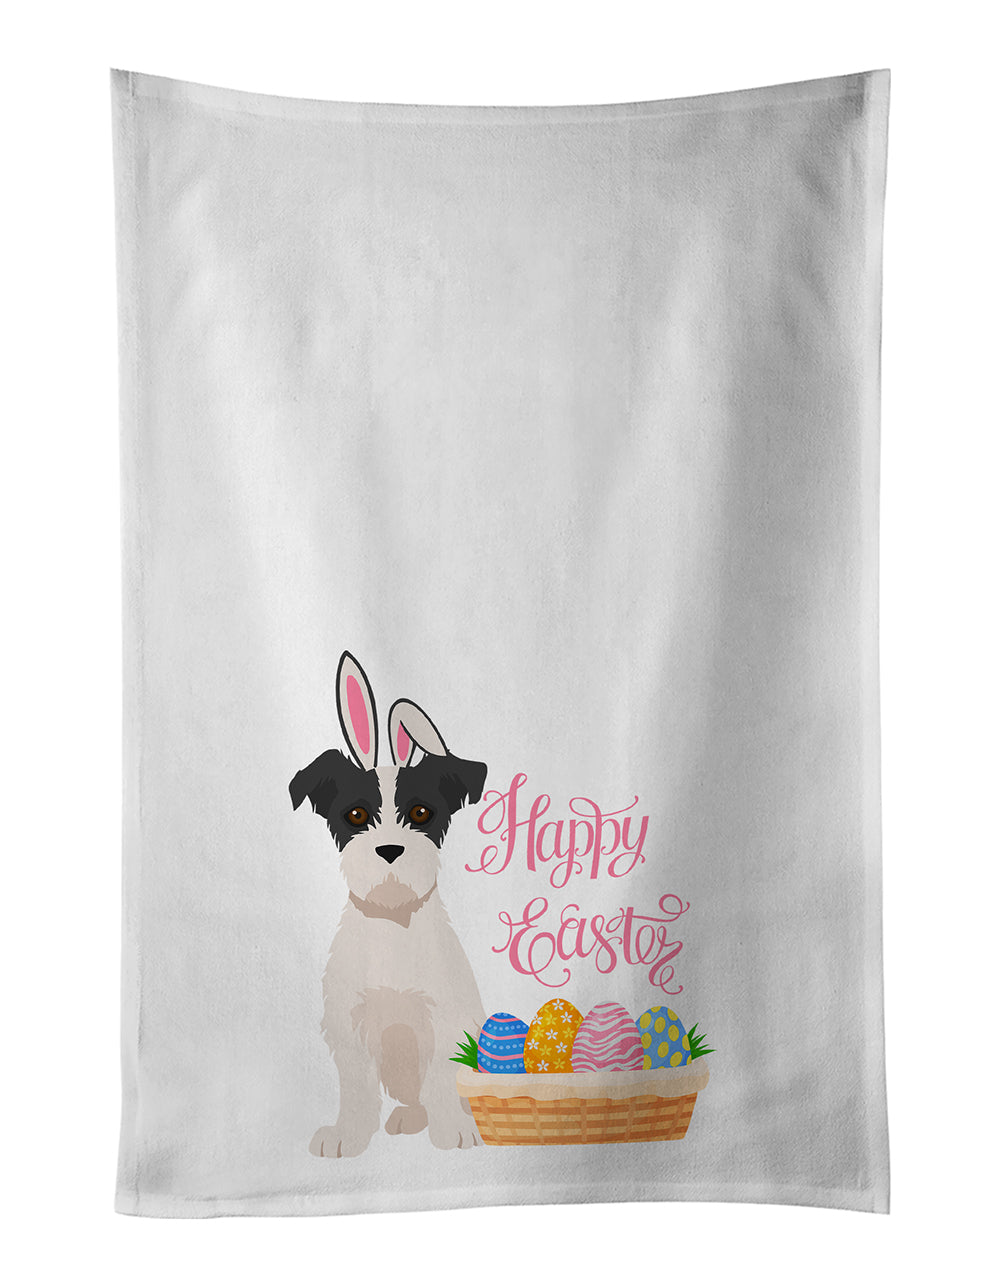 Buy this Black White Wirehair Jack Russell Terrier Easter White Kitchen Towel Set of 2 Dish Towels